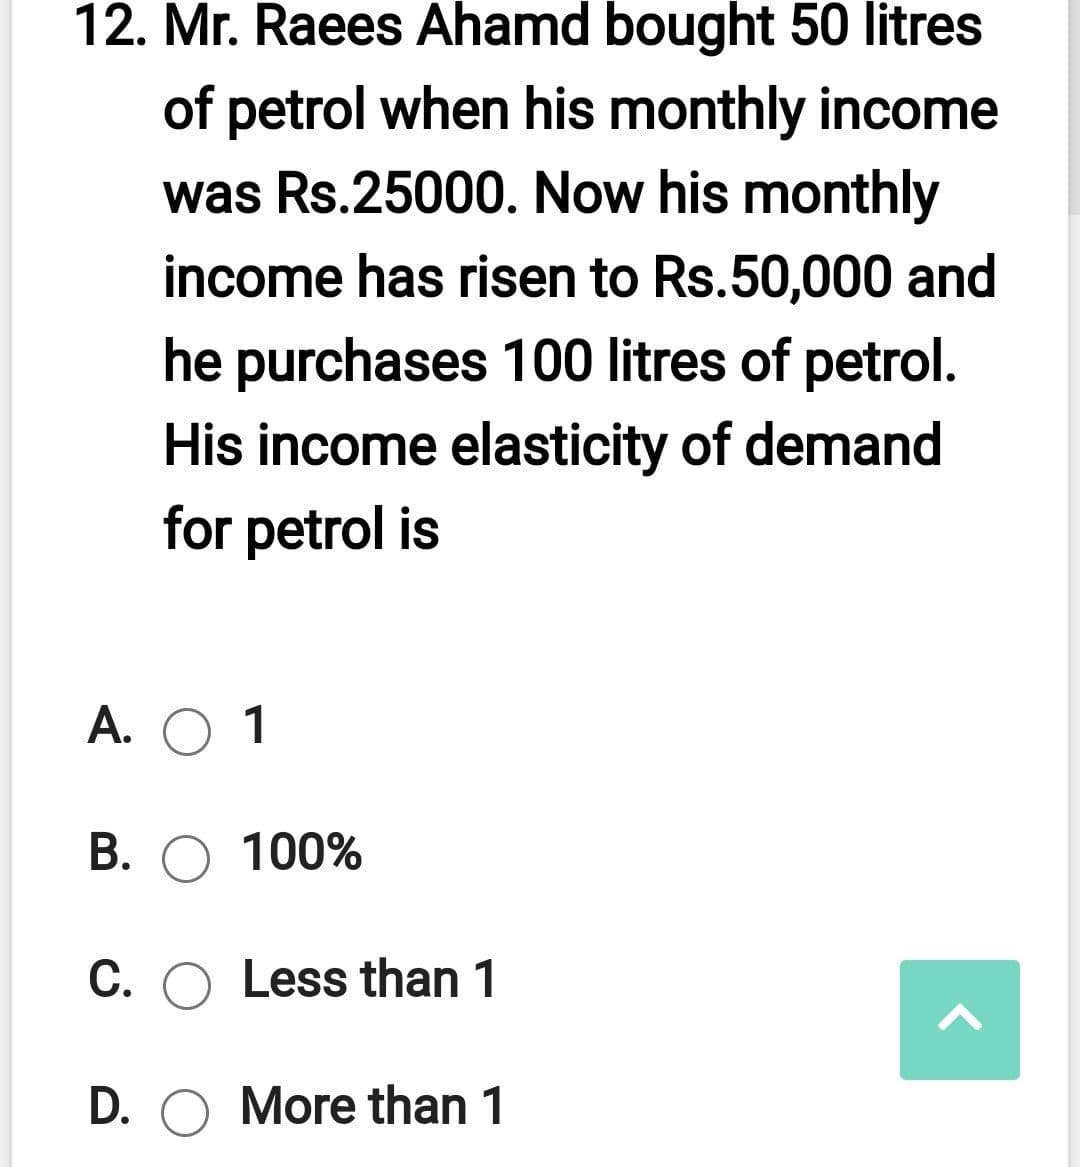 12. Mr. Raees Ahamd bought 50 litres
of petrol when his monthly income
was Rs.25000. Now his monthly
income has risen to Rs.50,000 and
he purchases 100 litres of petrol.
His income elasticity of demand
for petrol is
А. О 1
B. O 100%
C. O Less than 1
D. O More than 1
